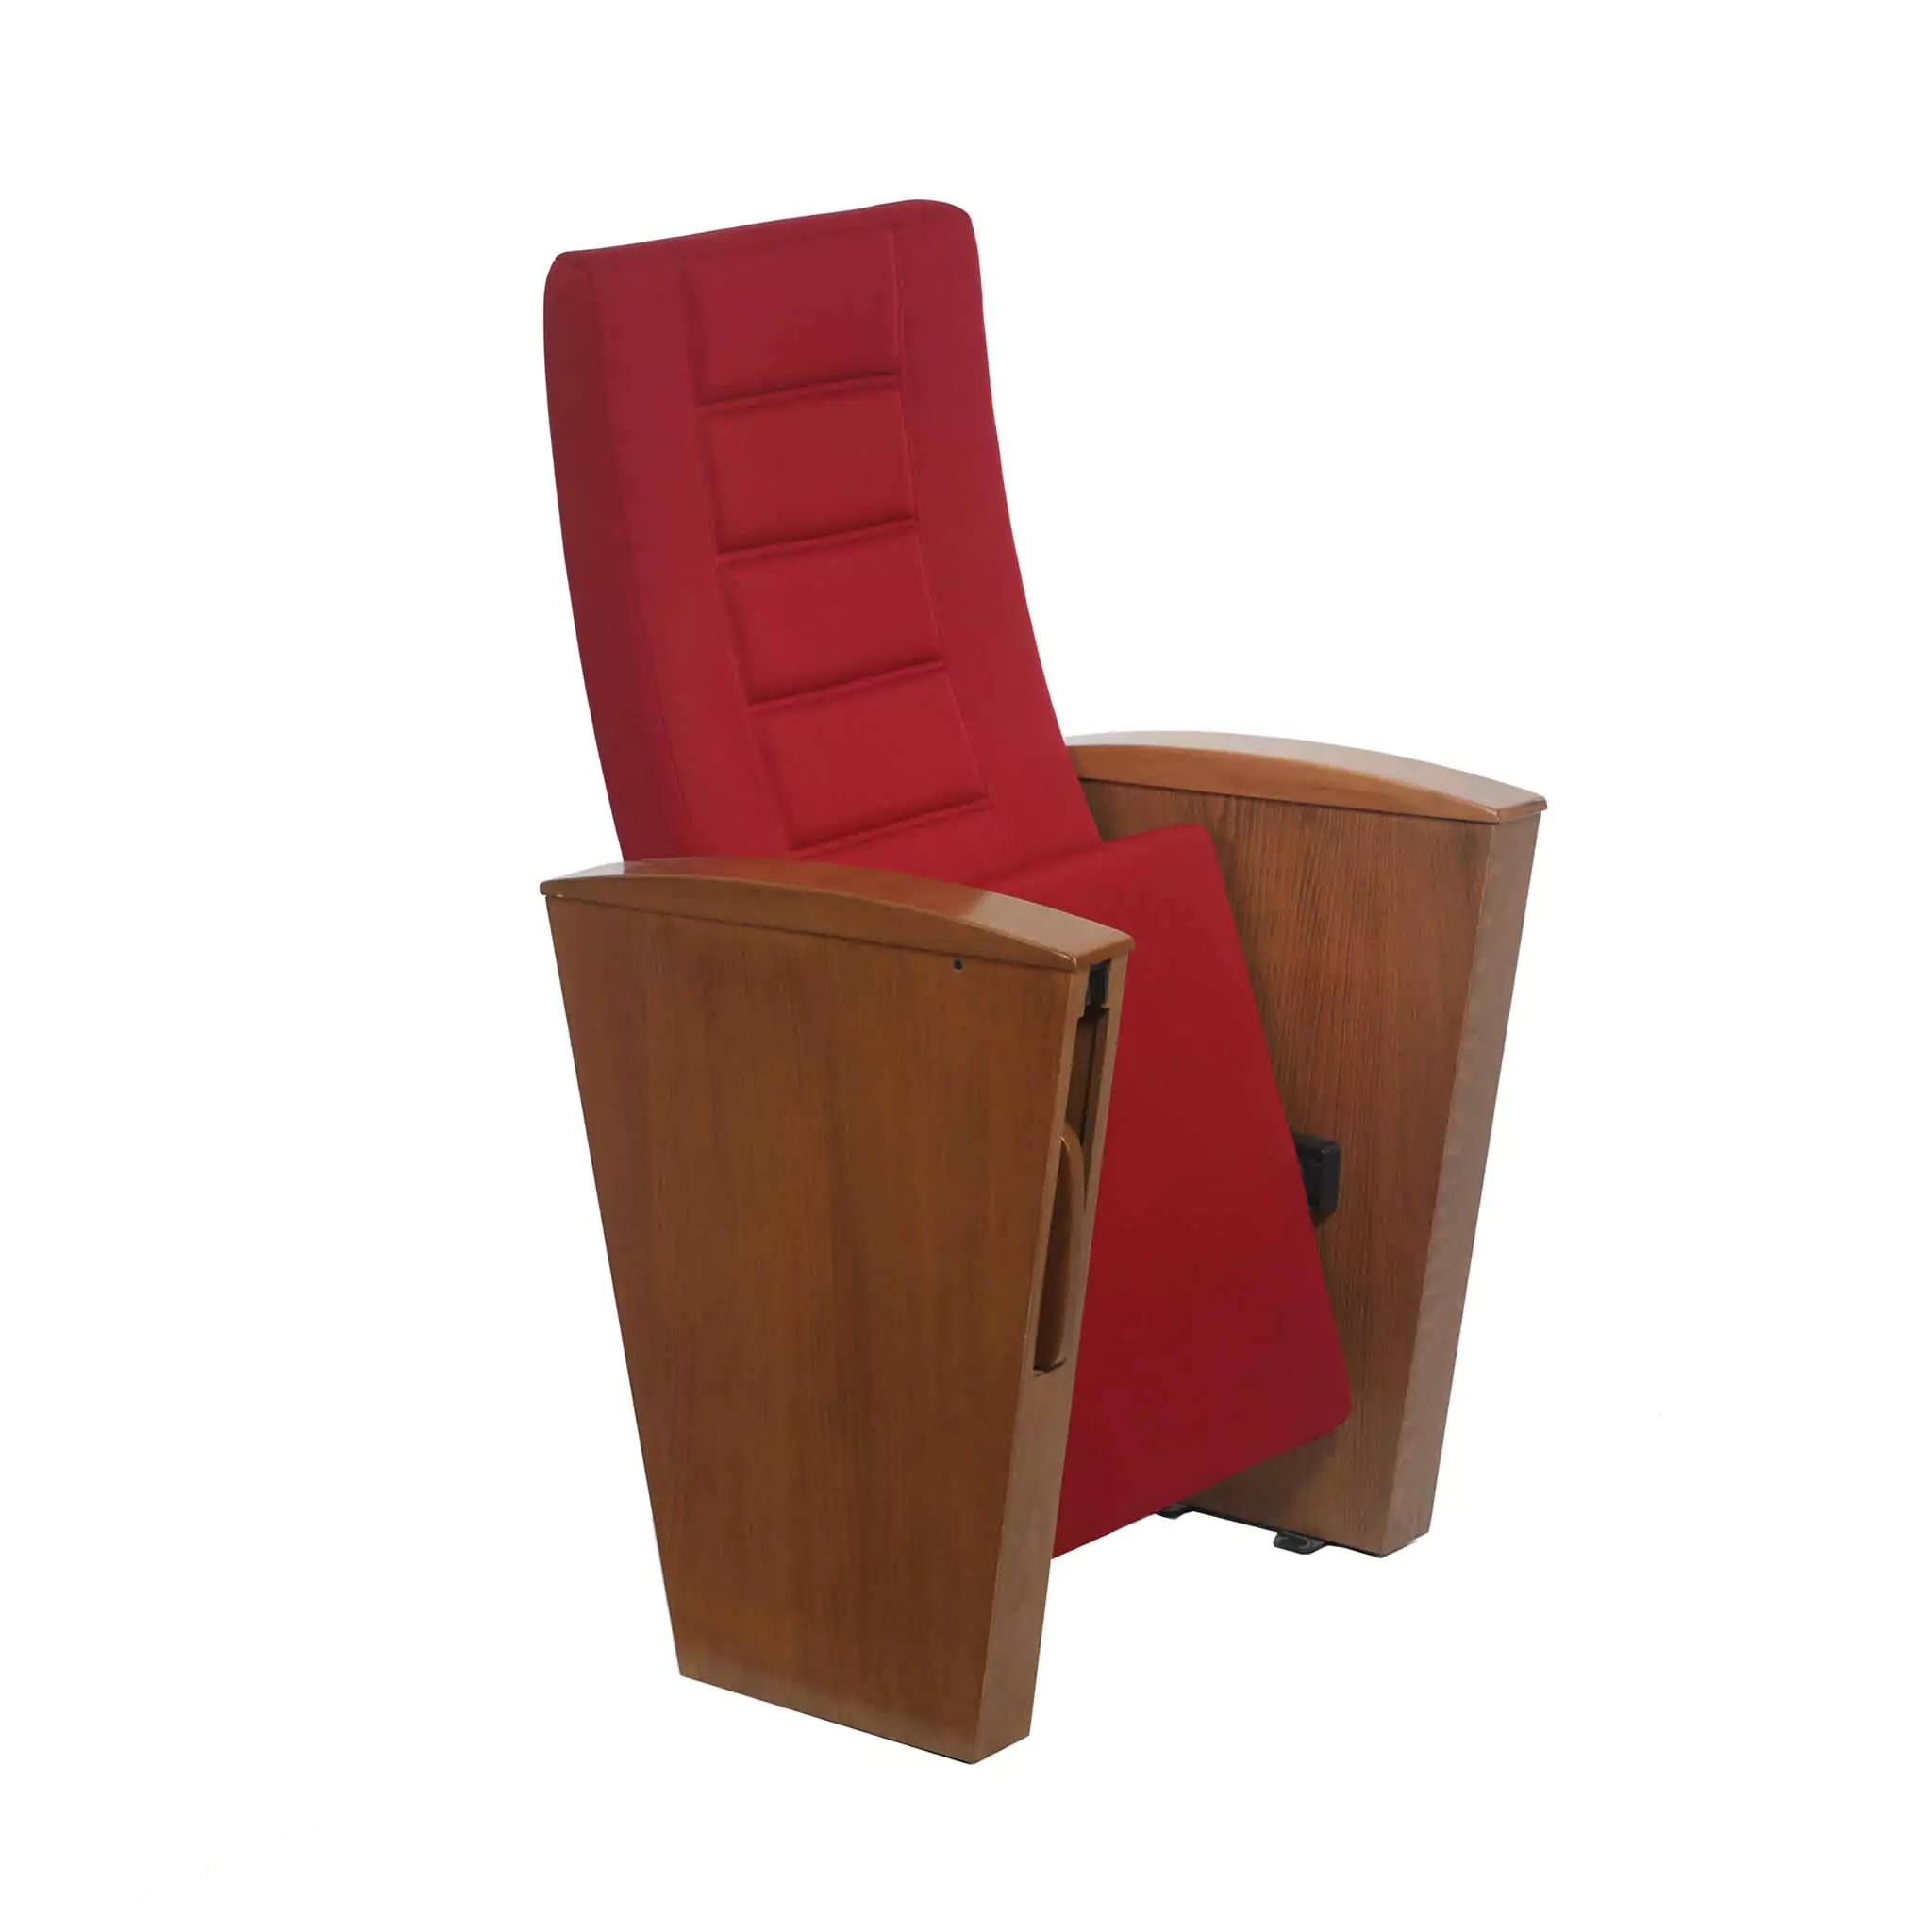 Simko Seating Products Conference Seat Pirit XL 03